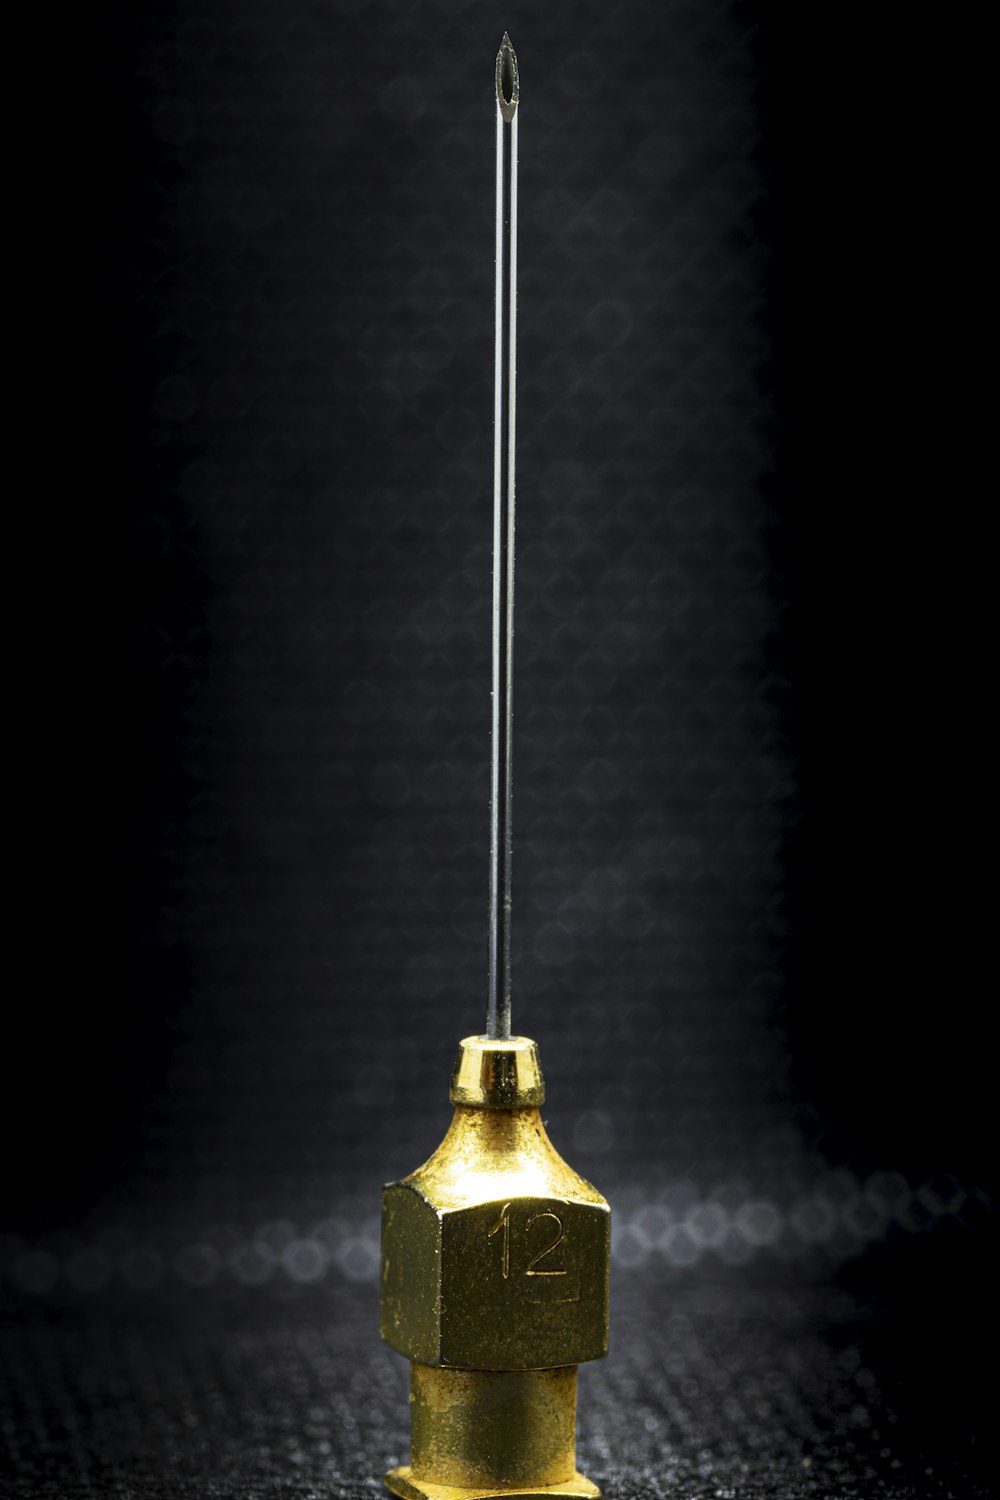 gold bell on black surface